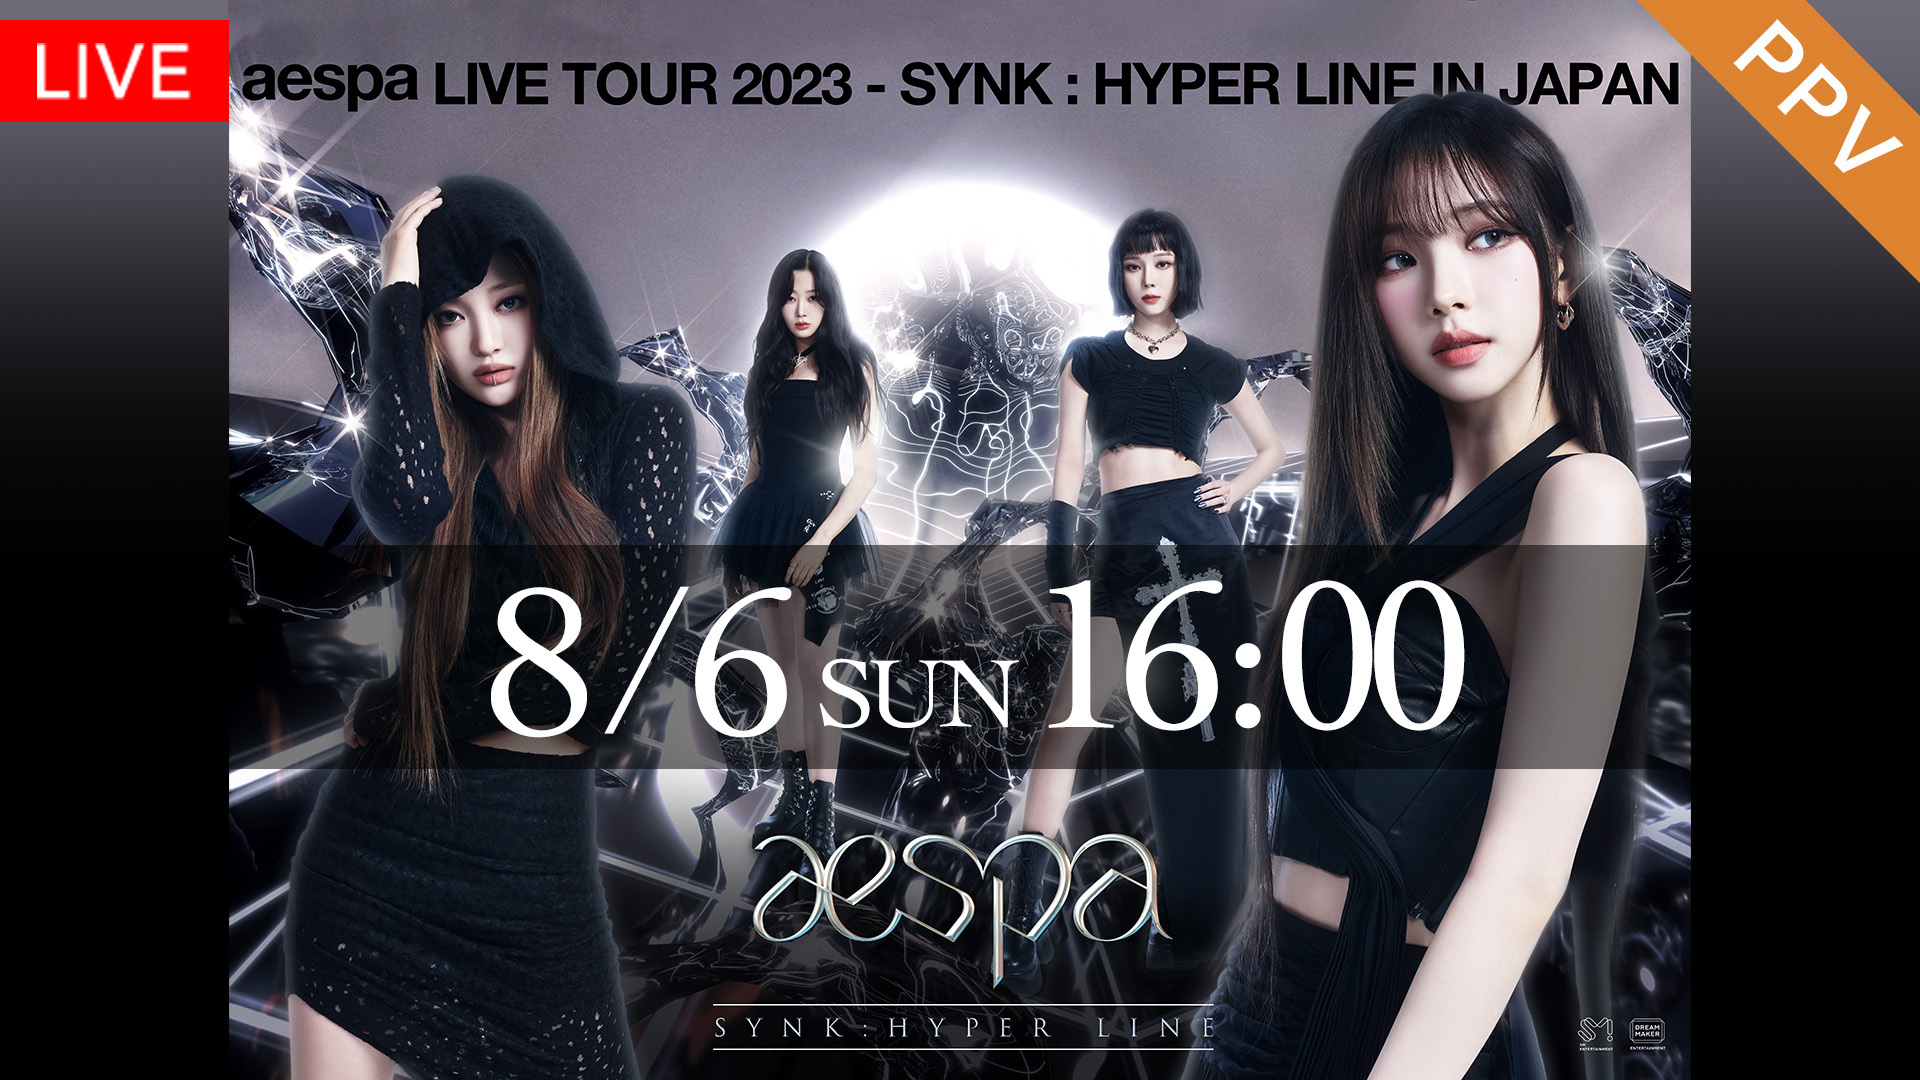 『aespa LIVE TOUR 2023 ‘SYNK : HYPER LINE’ in JAPAN -Special Edition-』FODで独占生配信決定！